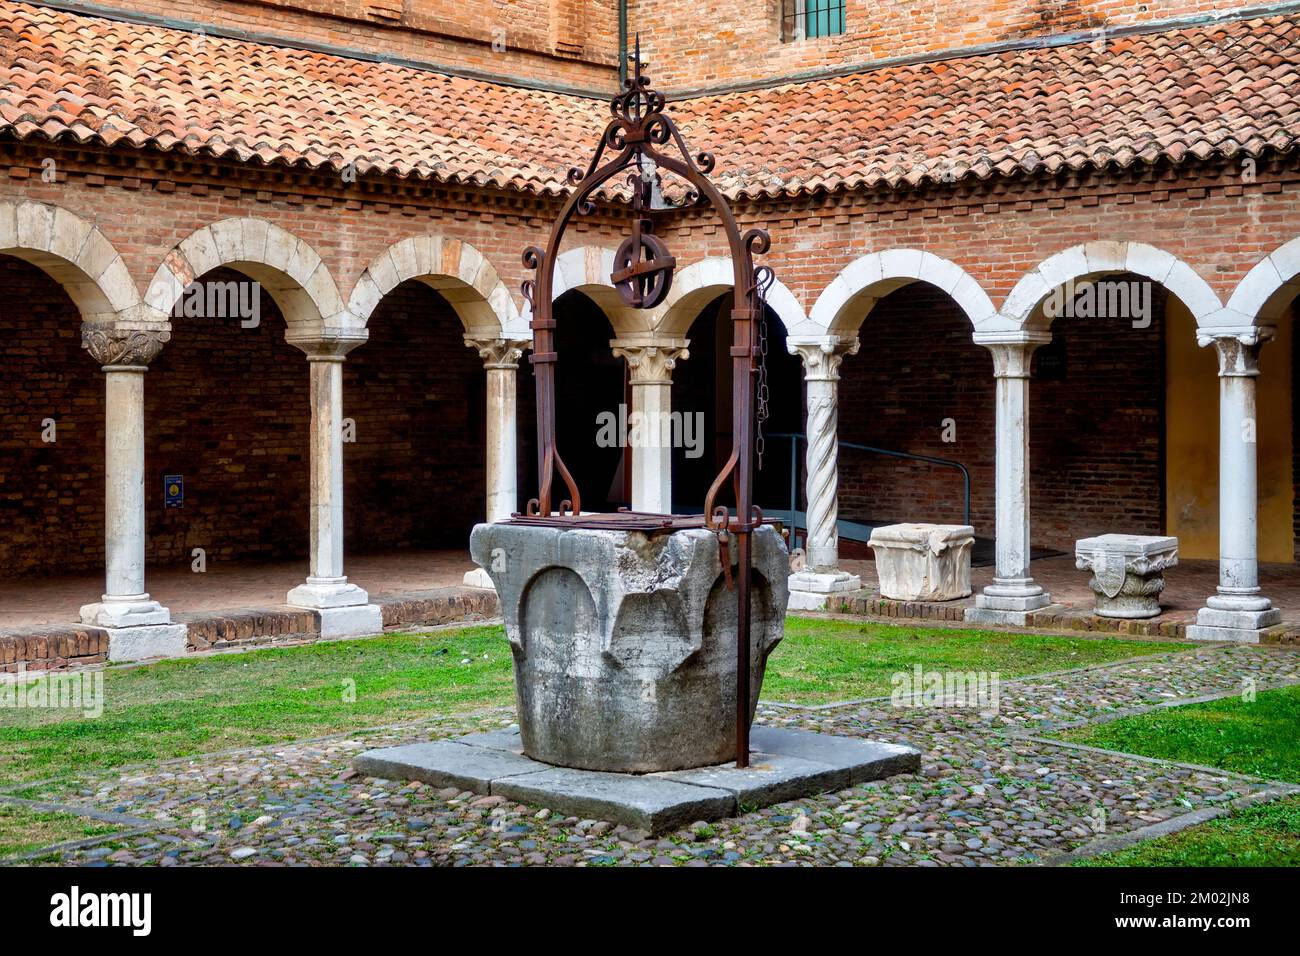 Cloister of the former church of San Romano now Museum of the Cathedral, Ferrara, Italy Stock Photo